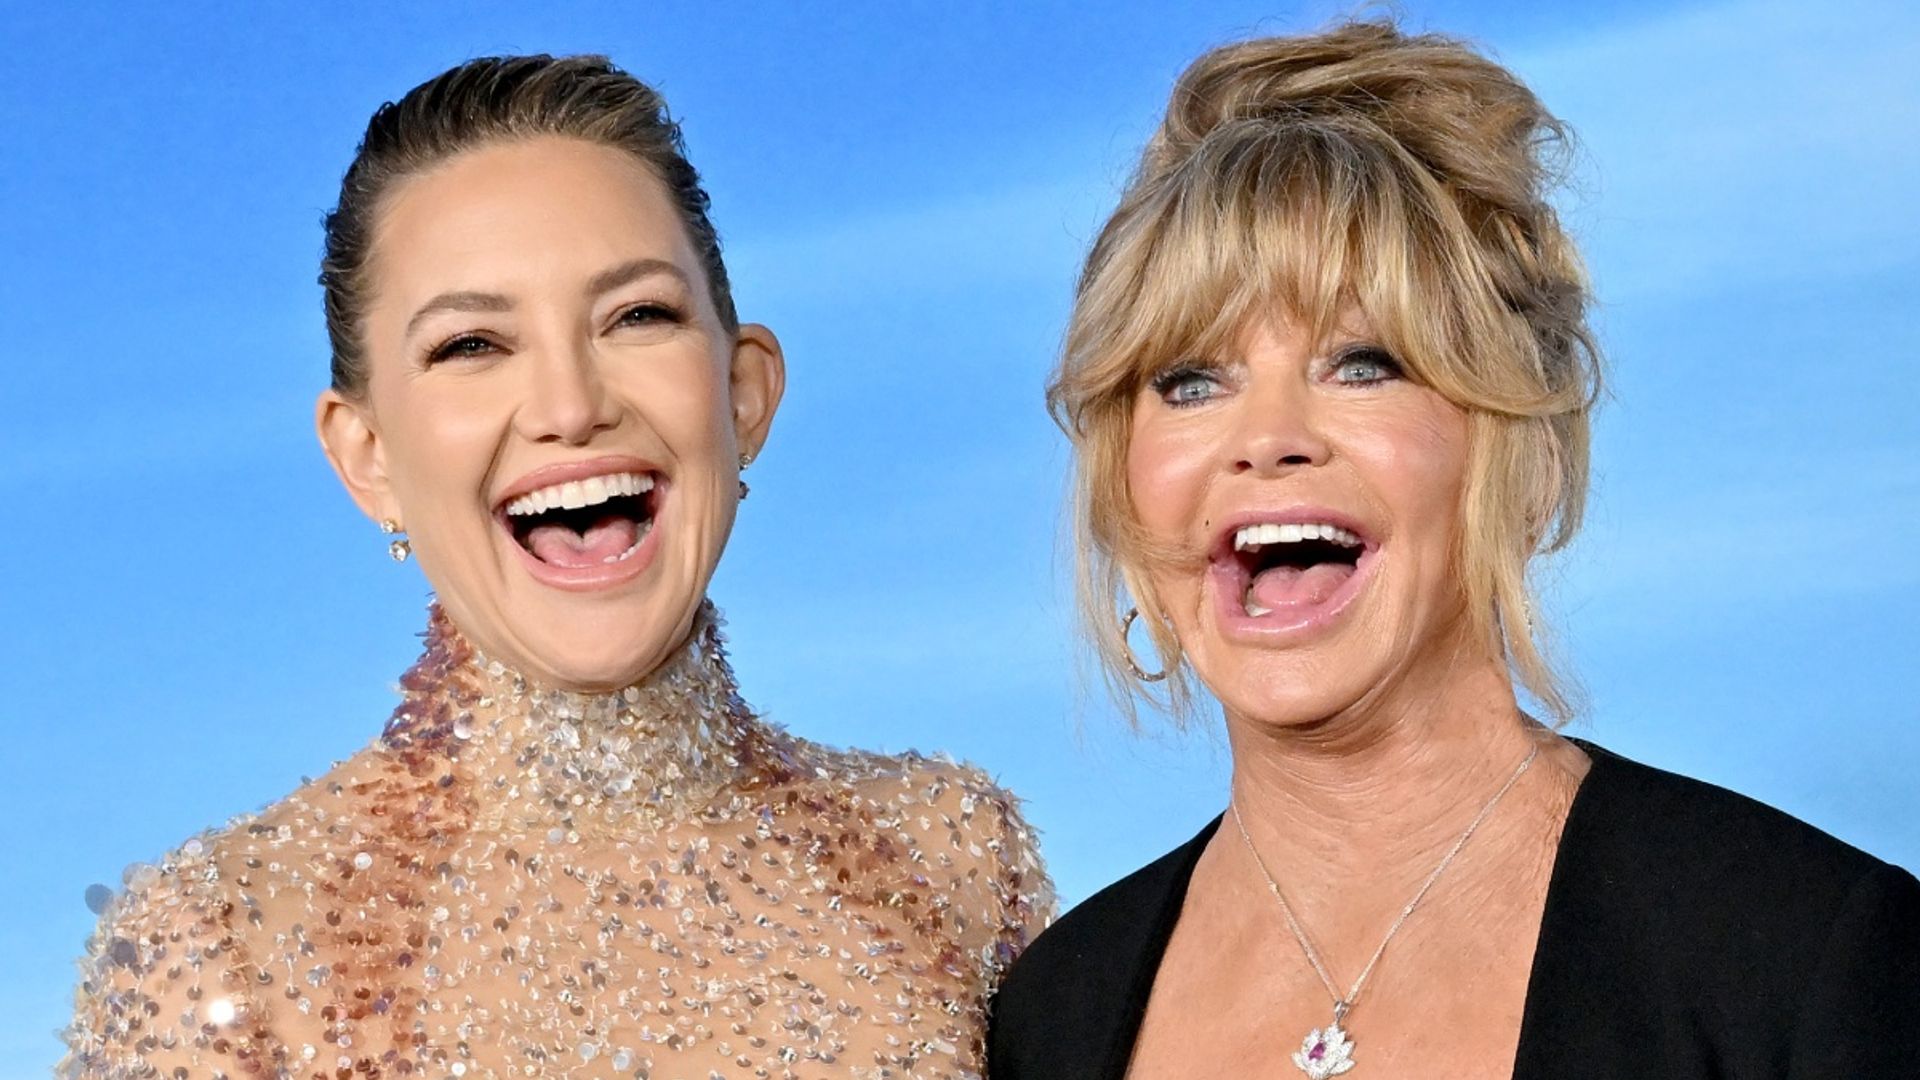 Goldie Hawn and Kate Hudson celebrate Kurt Russell's birthday with sweet video